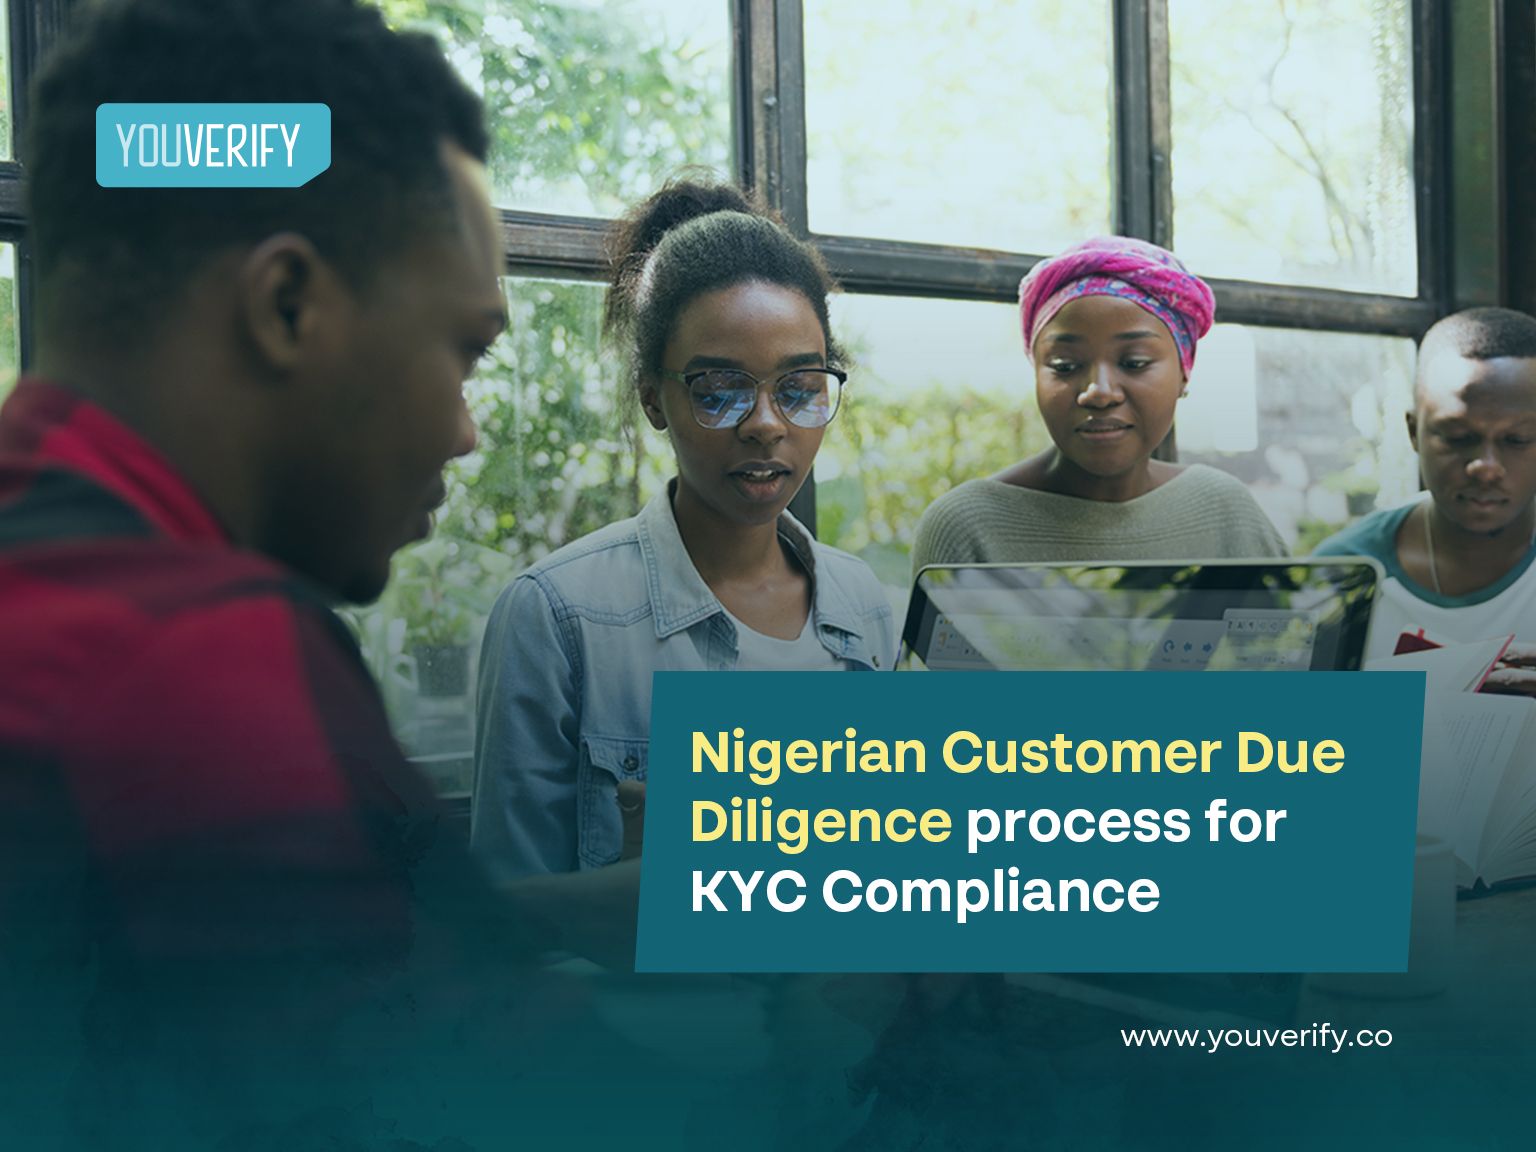 Customer Due Diligence Process for KYC Compliance in Nigeria